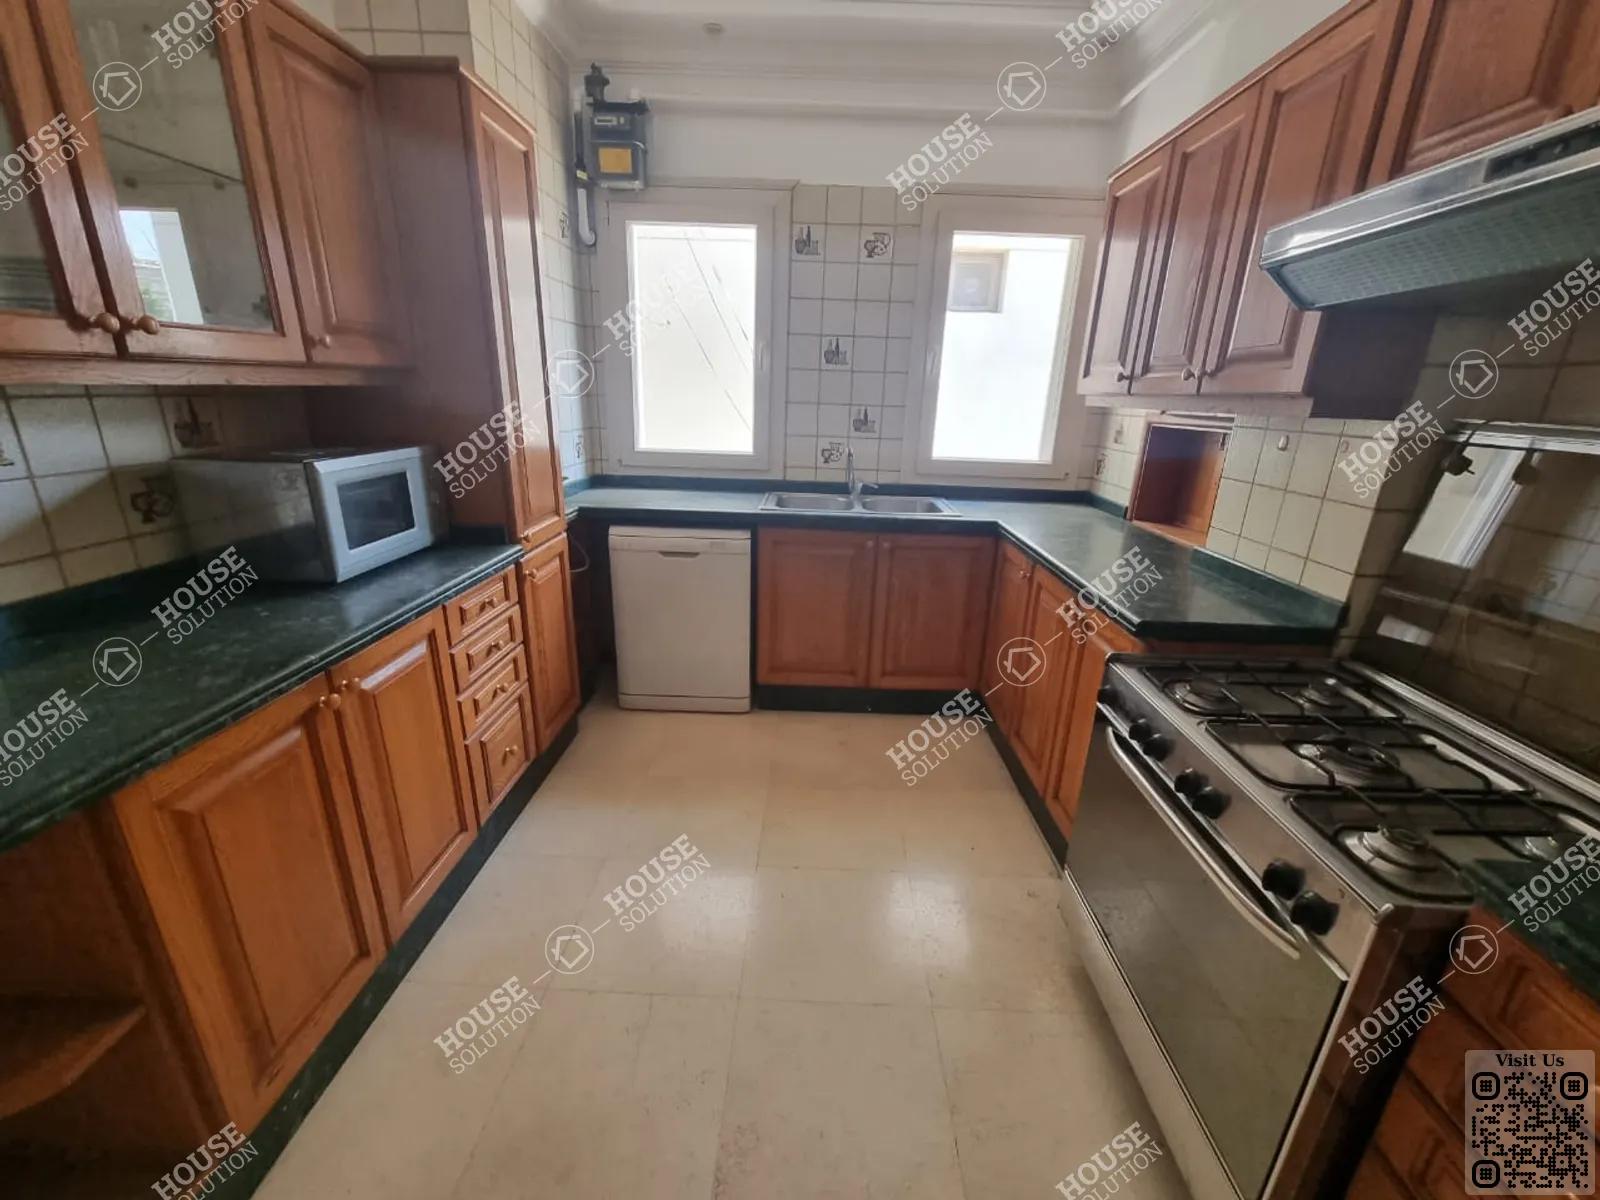 KITCHEN  @ Apartments For Rent In Maadi Maadi Degla Area: 185 m² consists of 3 Bedrooms 2 Bathrooms Modern furnished 5 stars #5676-1